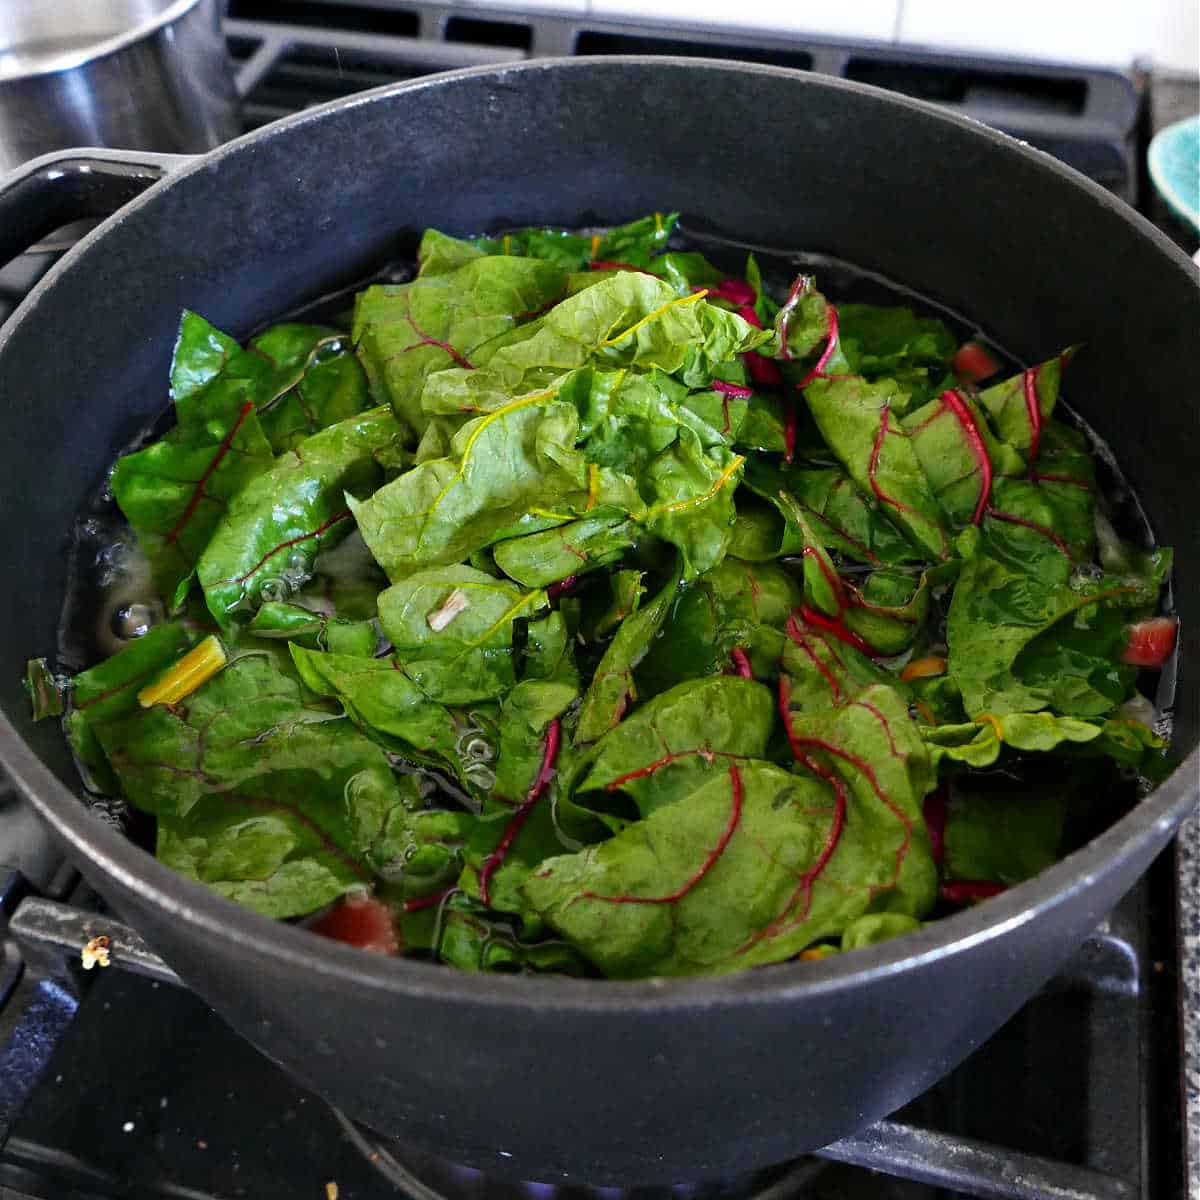 chard leaves being added to a pot of potatoes and chard stems on a stove